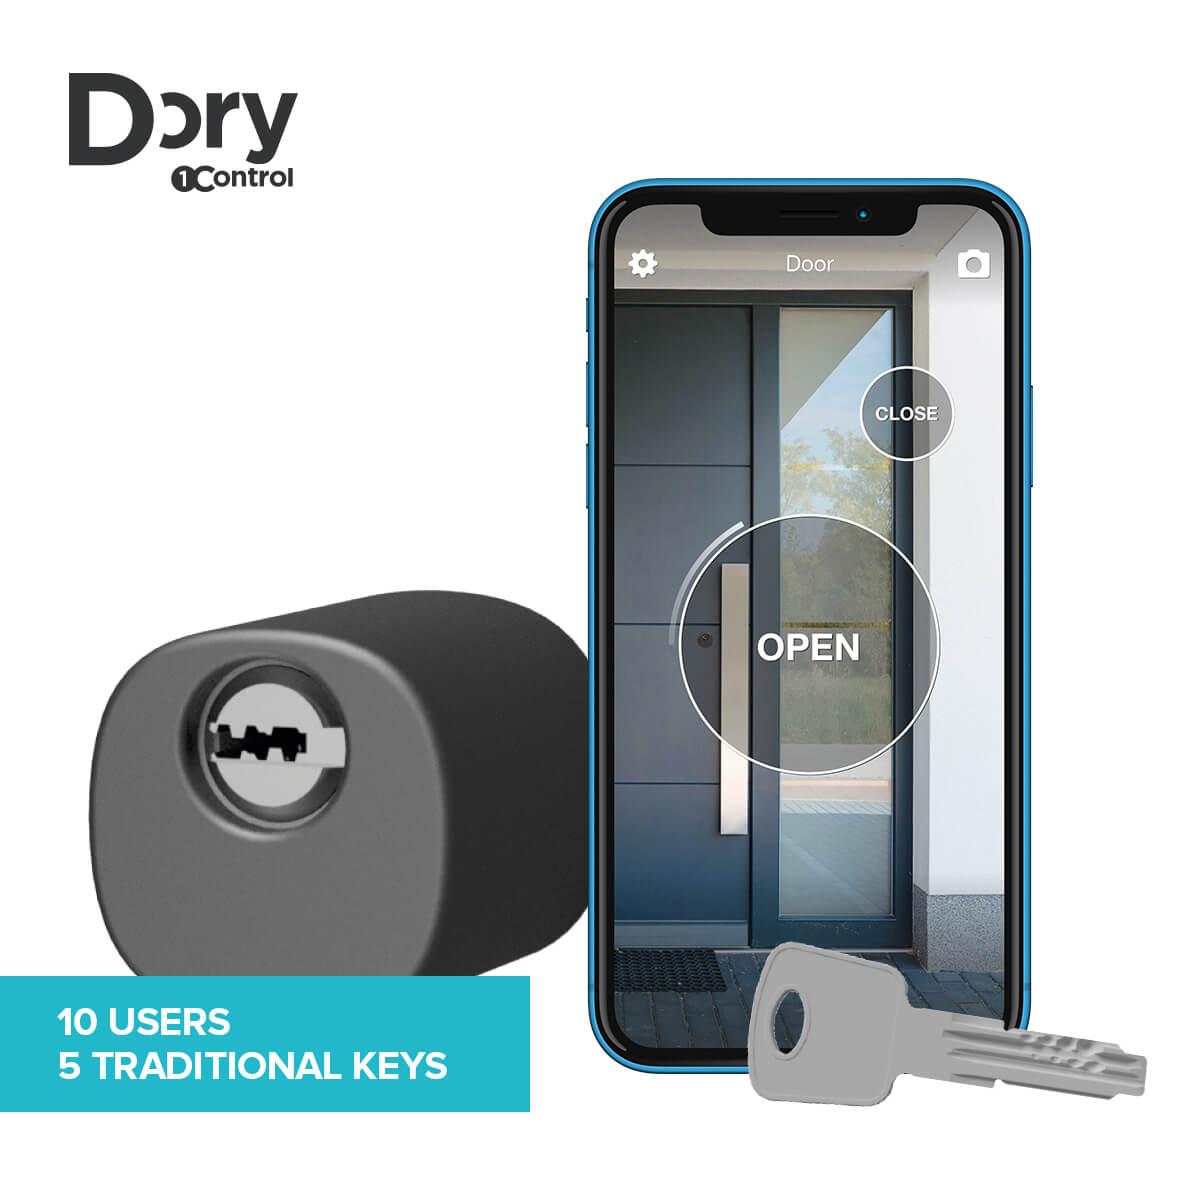 DORY smart home electronic lock